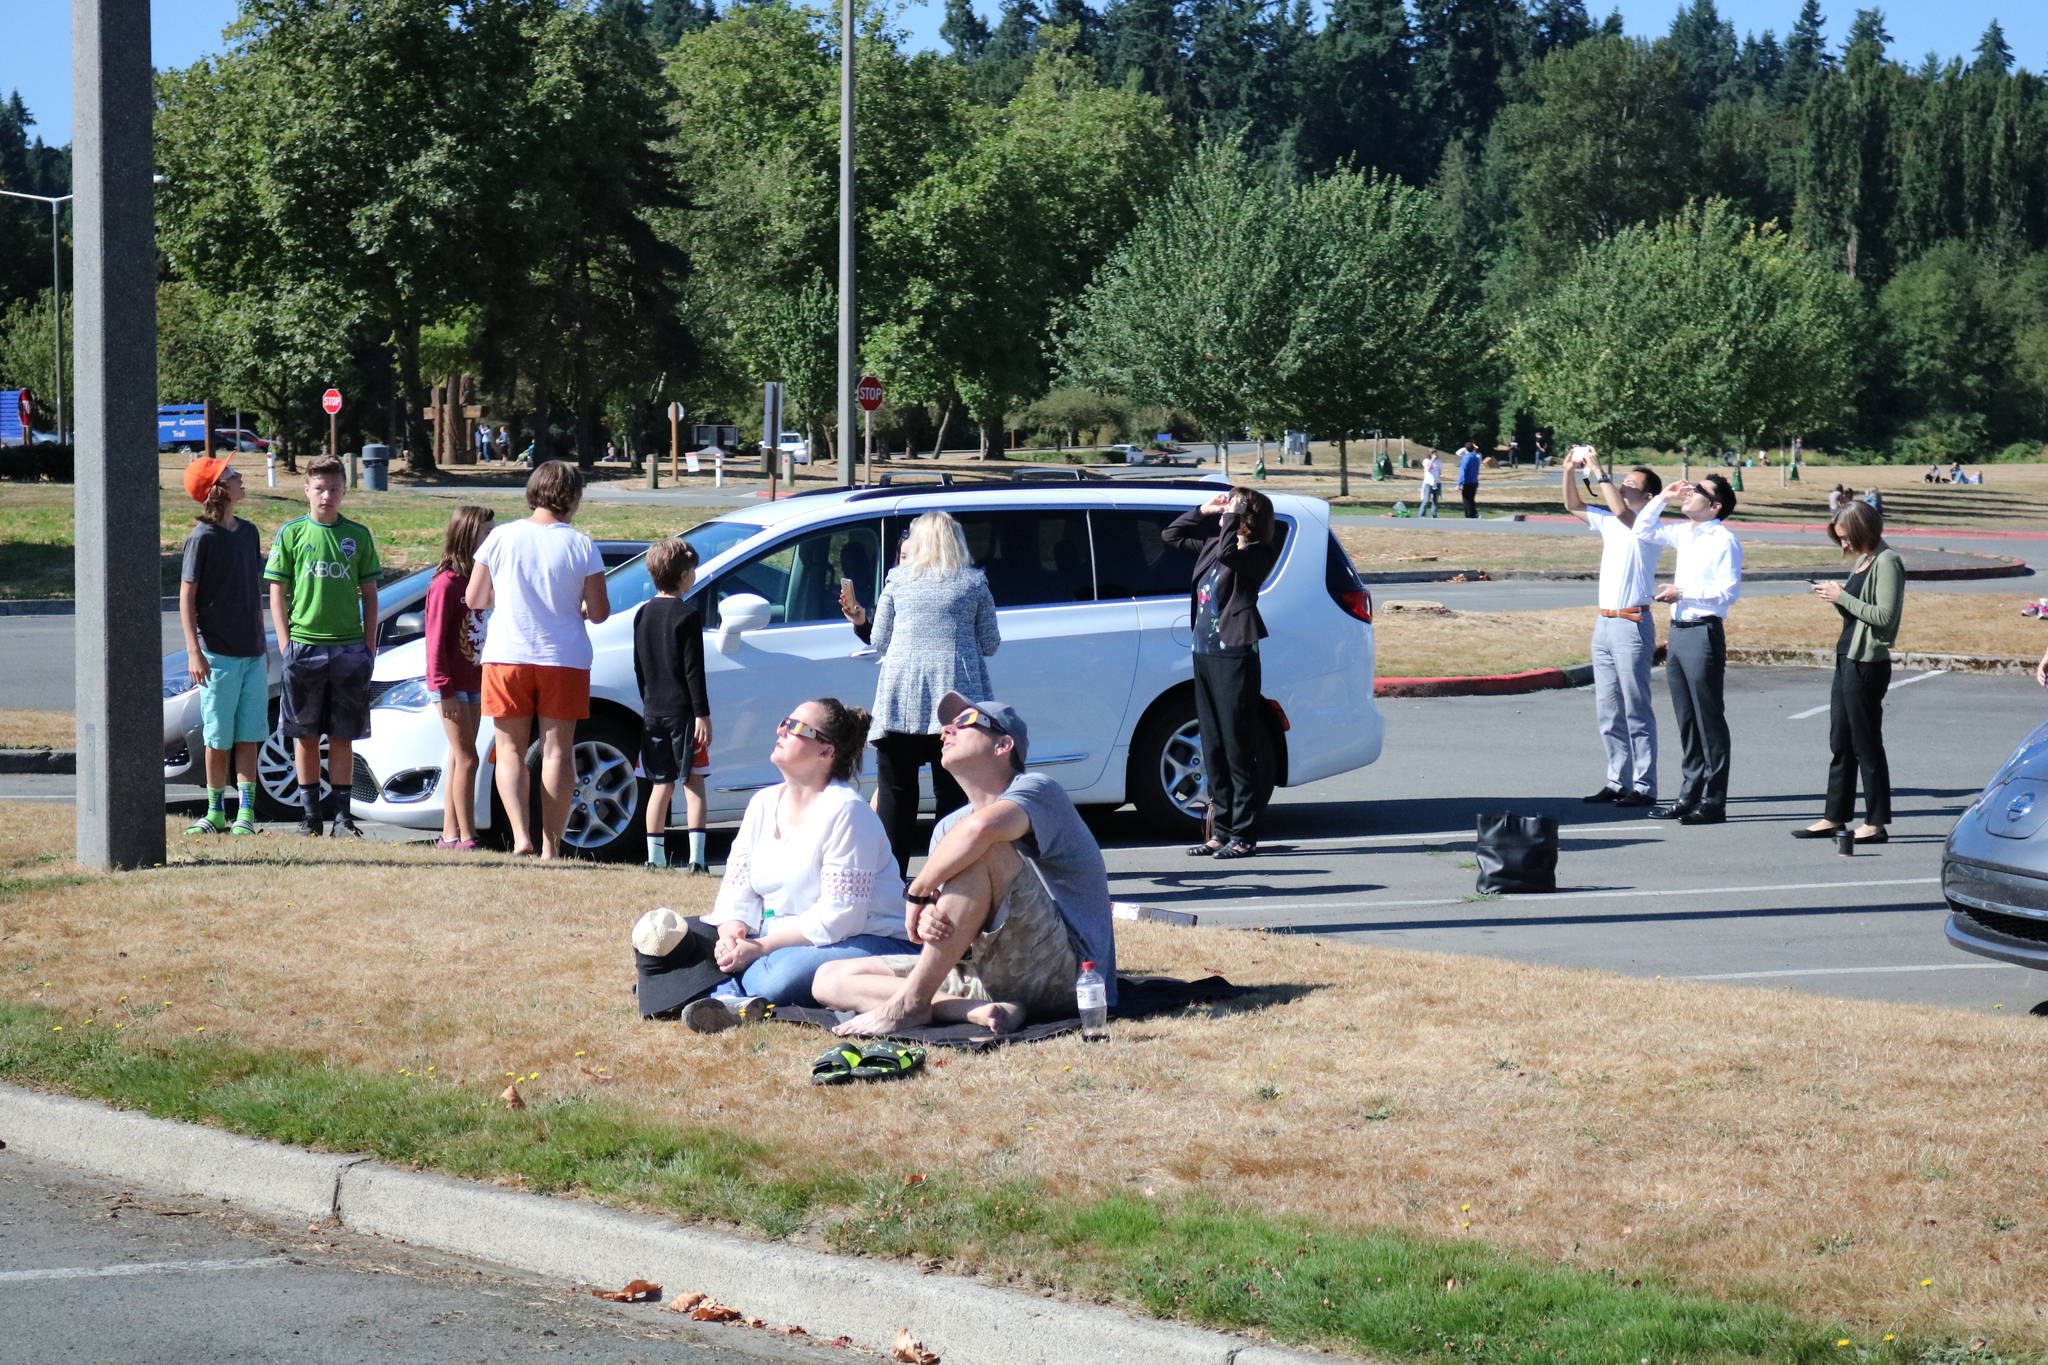 People gathered at Marymoor Park near Redmond on Monday to watch the partial solar eclipse. Aaron Kunkler/Redmond Reporter